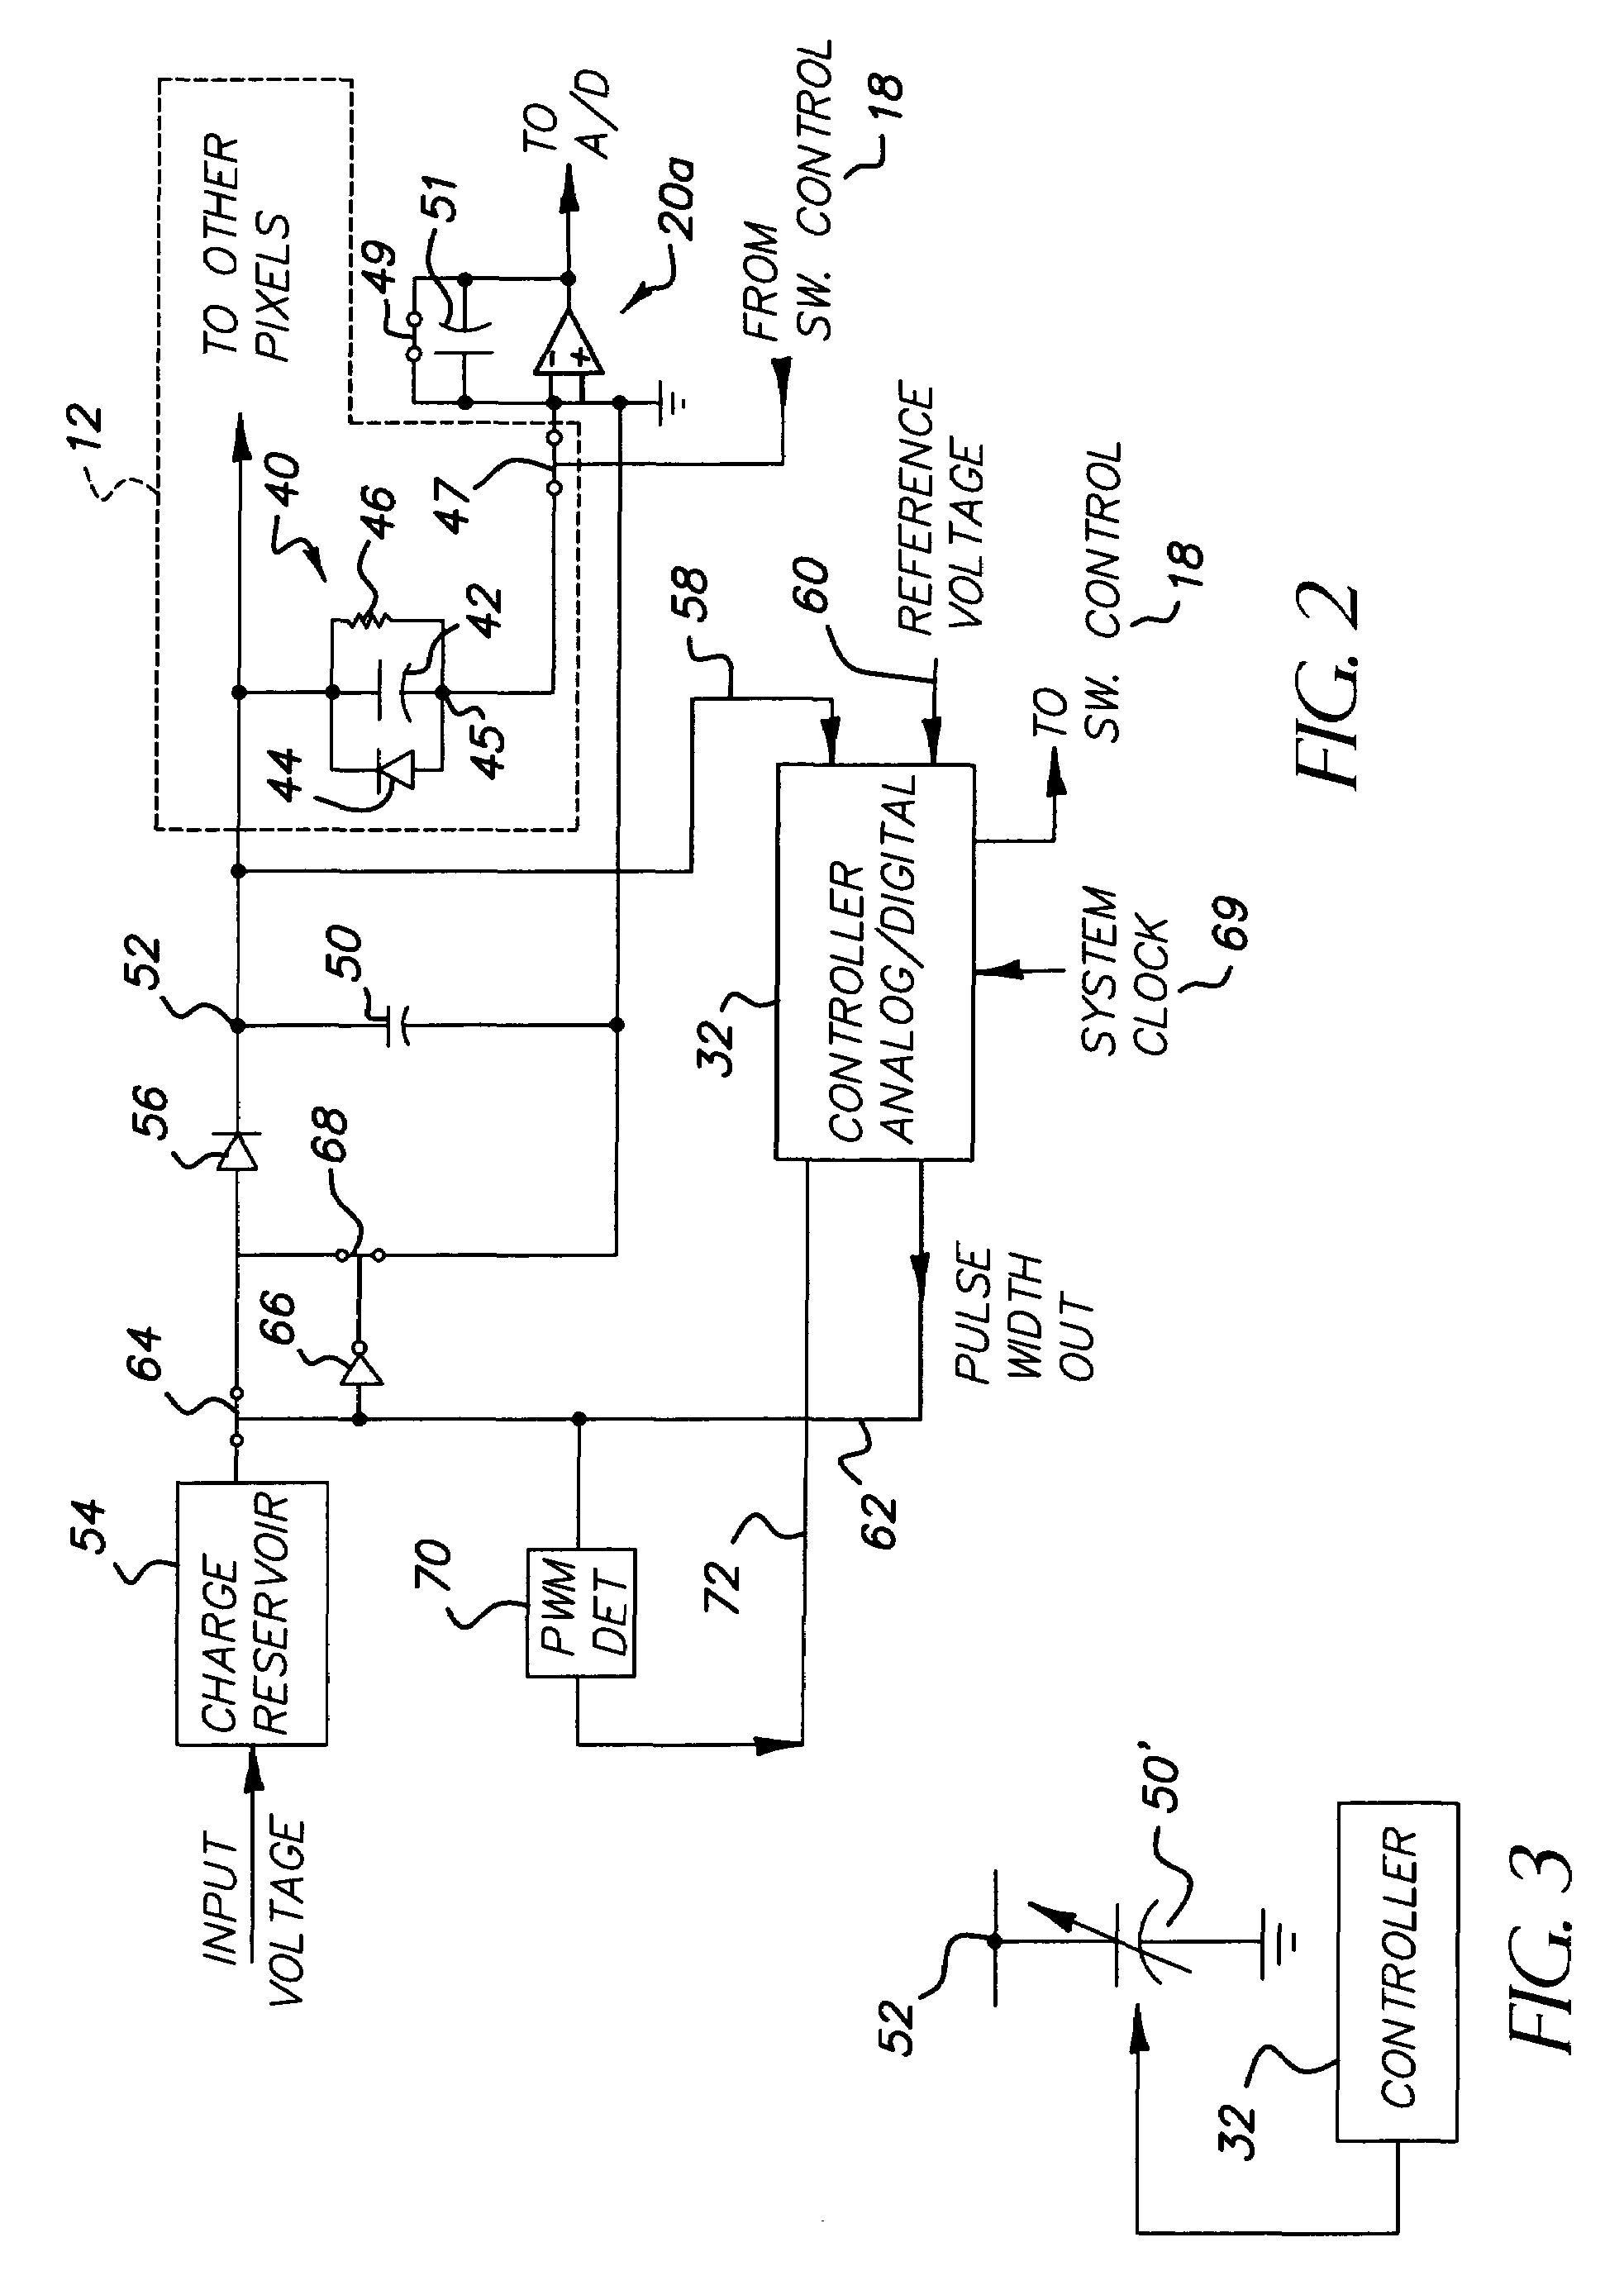 X-ray impingement event detection system and method for a digital radiography detector